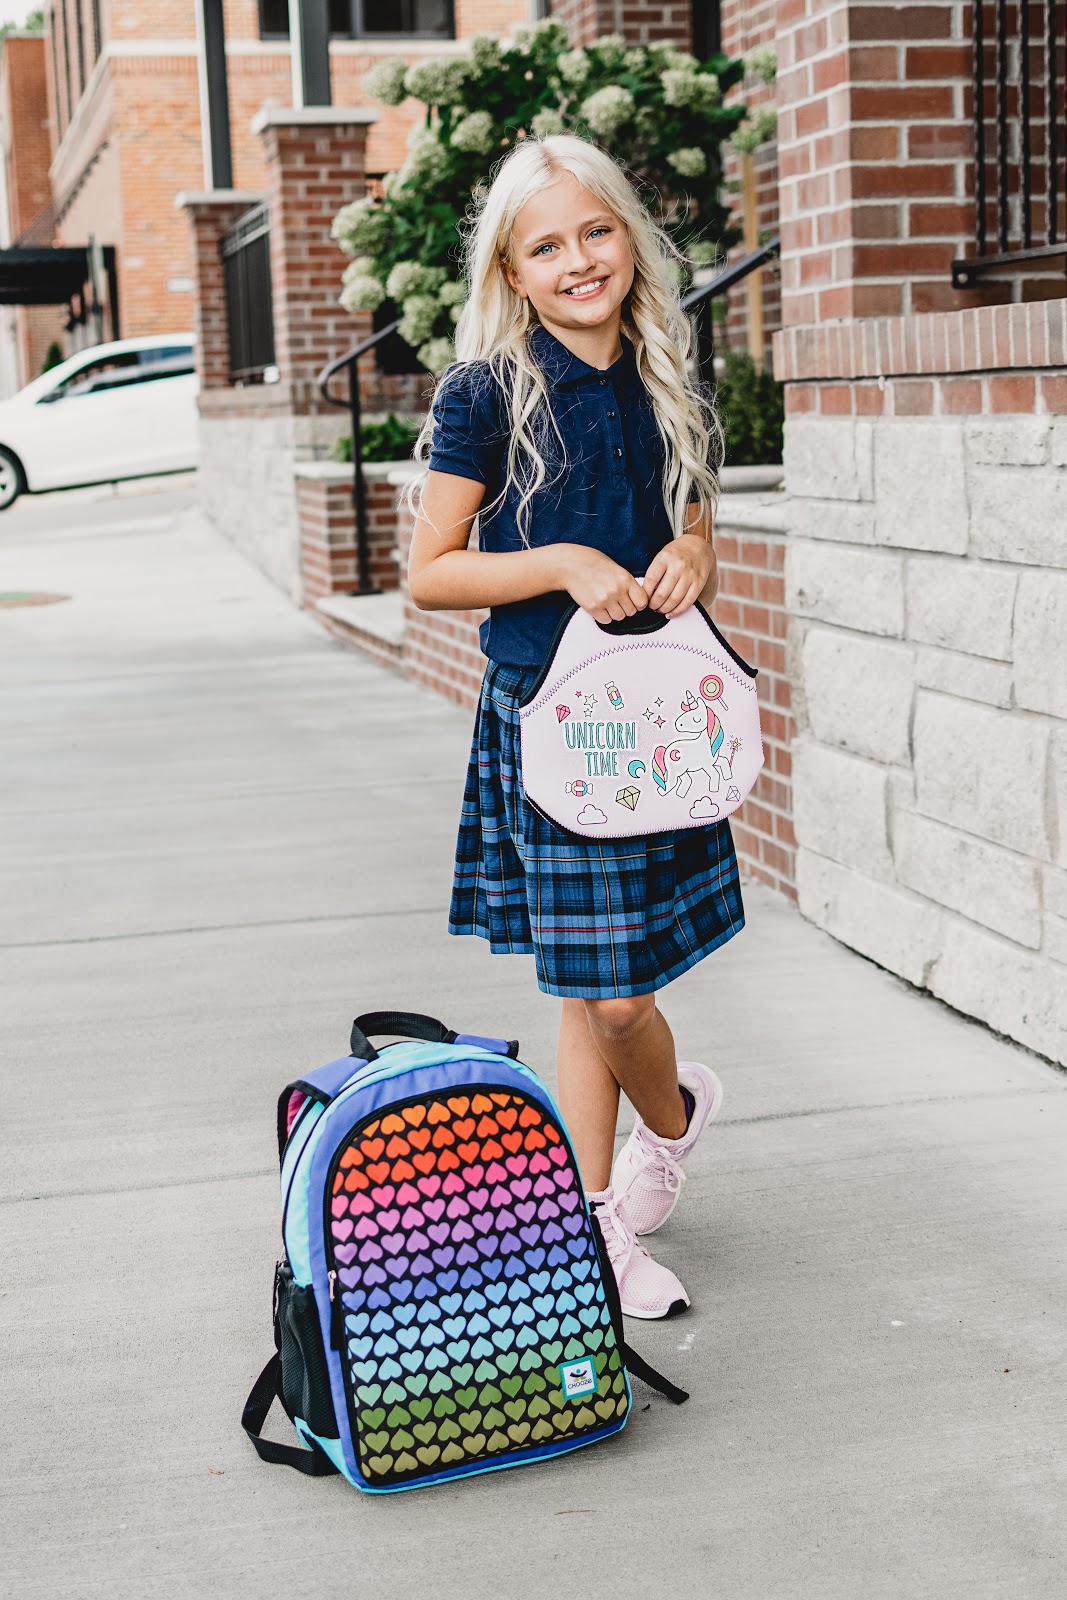 Back to school shopping, outfits, ideas, girl, little girl, backpack, shoes, clothes uniforms french toast